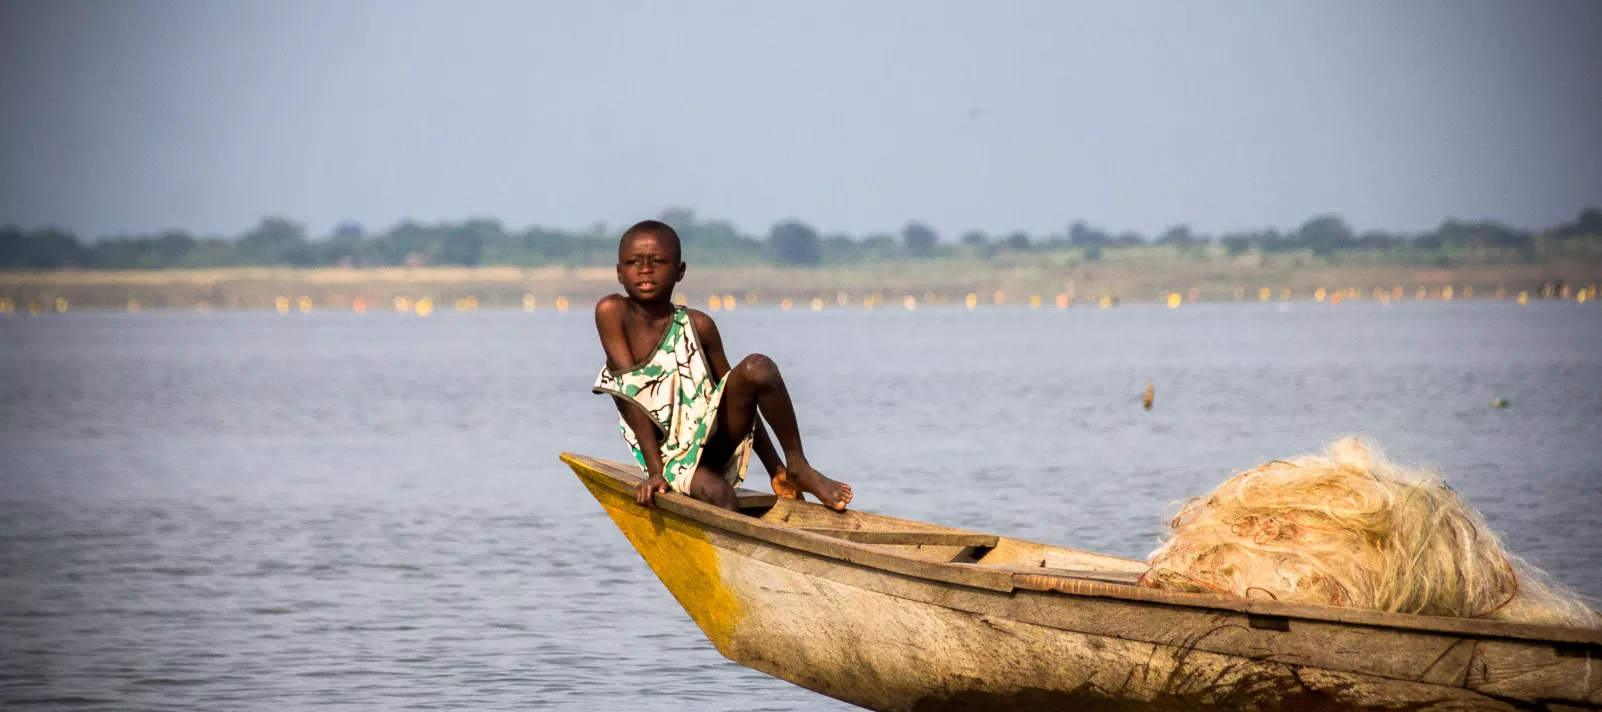 A young boy rest on a canoe on the Volta Lake in Dambai in the Volta Region